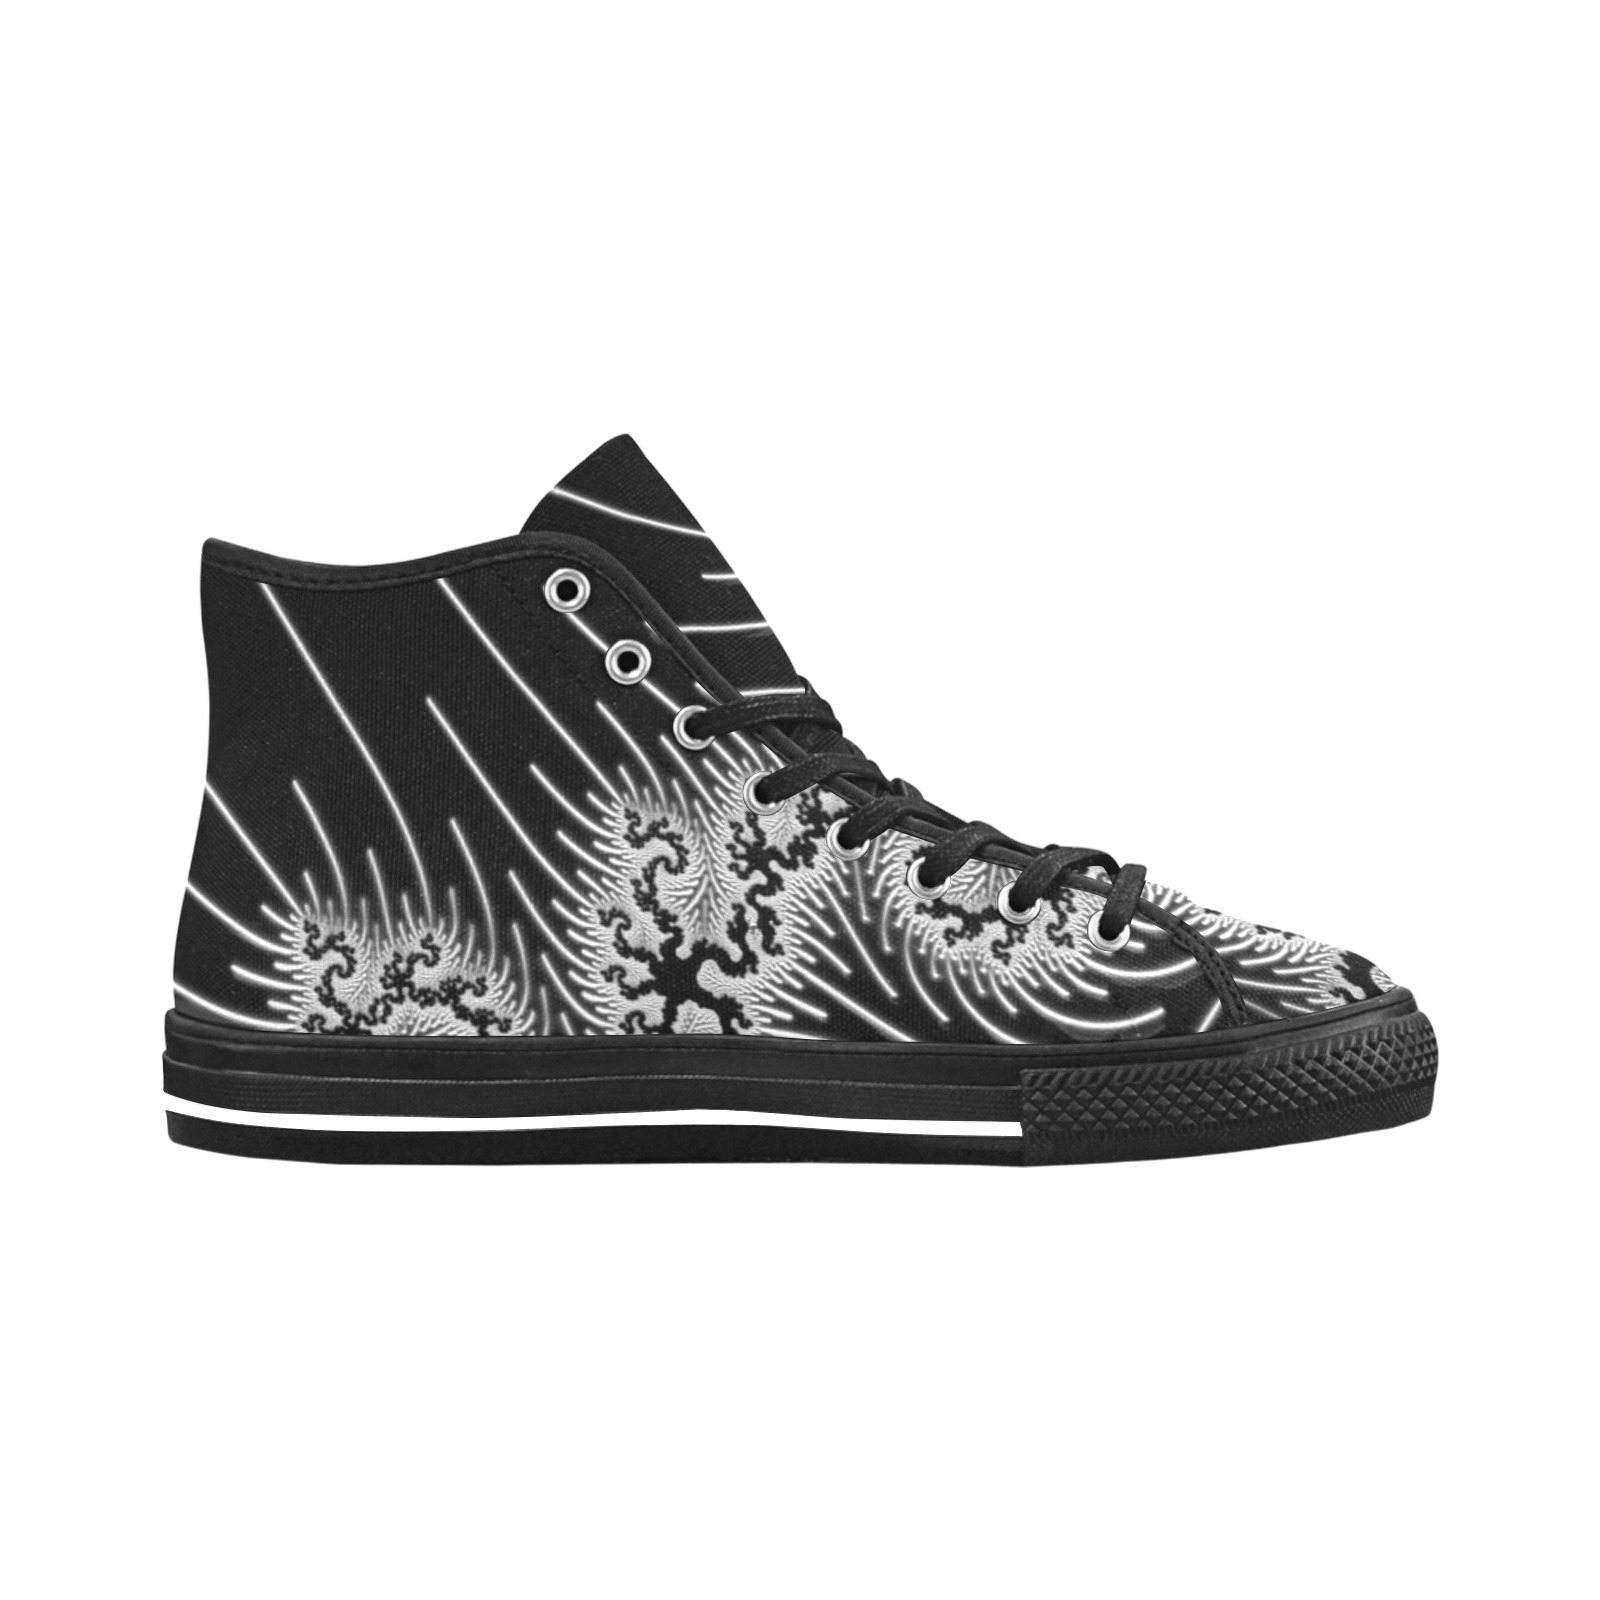 White and Silver Lace on Black Fractal Abstract Vancouver H Men's Canvas Shoes (1013-1)